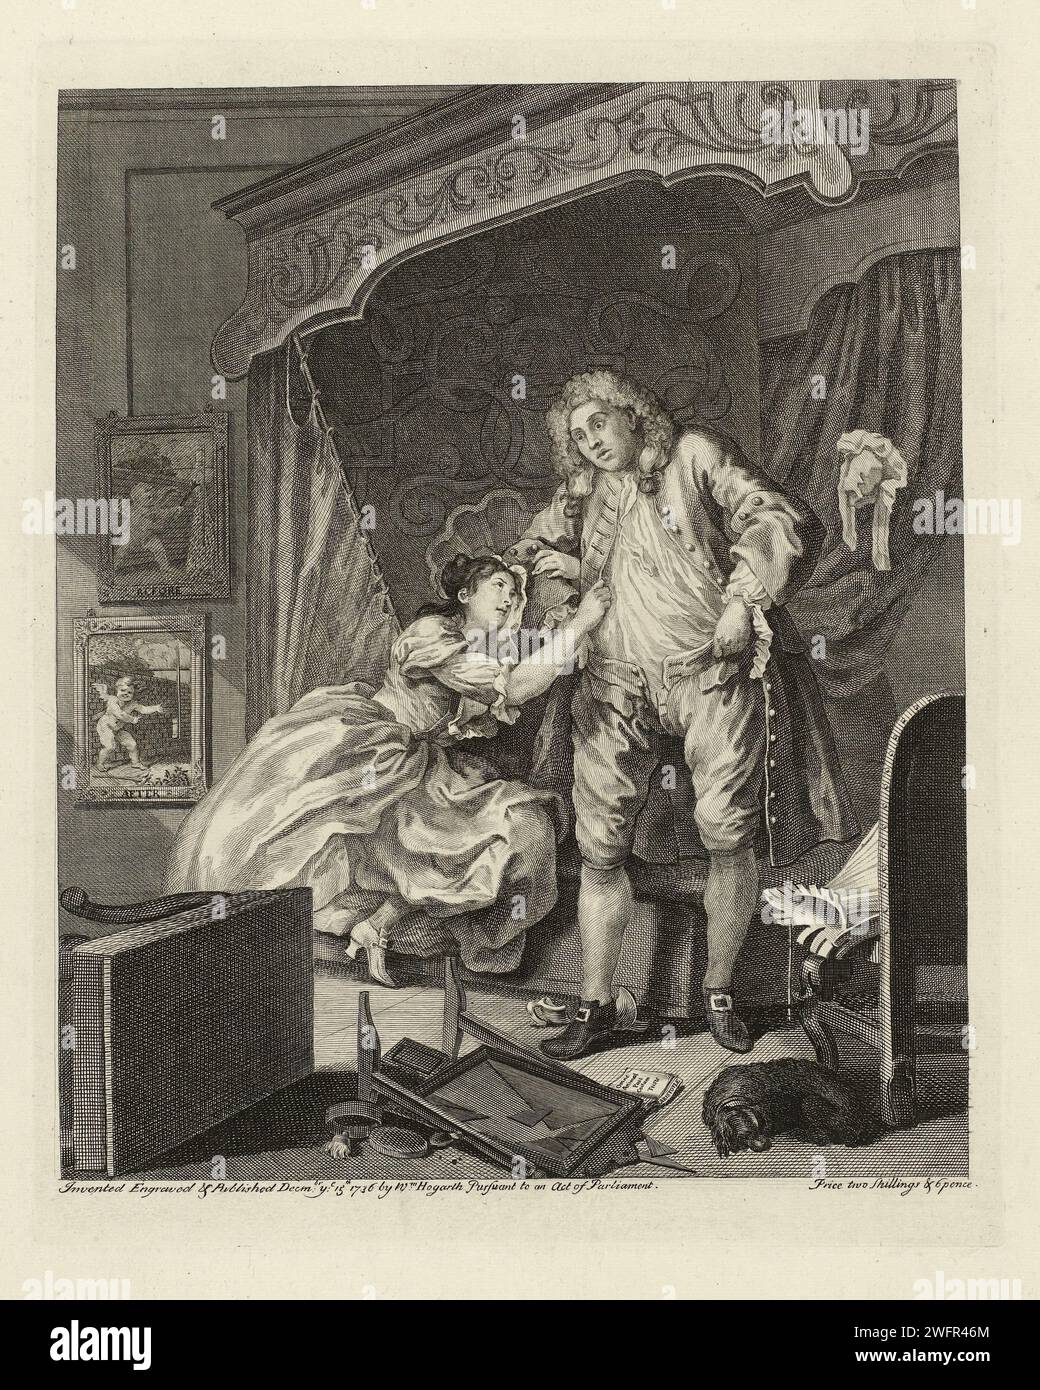 Woman hangs on the arm of a man in a bedroom, William Hogarth, 1736 print The painting with 'Before' falls into the shadow of the bed. In the list, Cupido points to a rocket that falls down. The tract by Aristotle that lies on the floor refers to the Aforism 'Omne Animal Post Coitum Tristen', which refers to the depression that the man radiates. The woman is still in bed and clings to the man's arm.  paper etching / engraving one-sided courting; pursuit; difficult choice Stock Photo